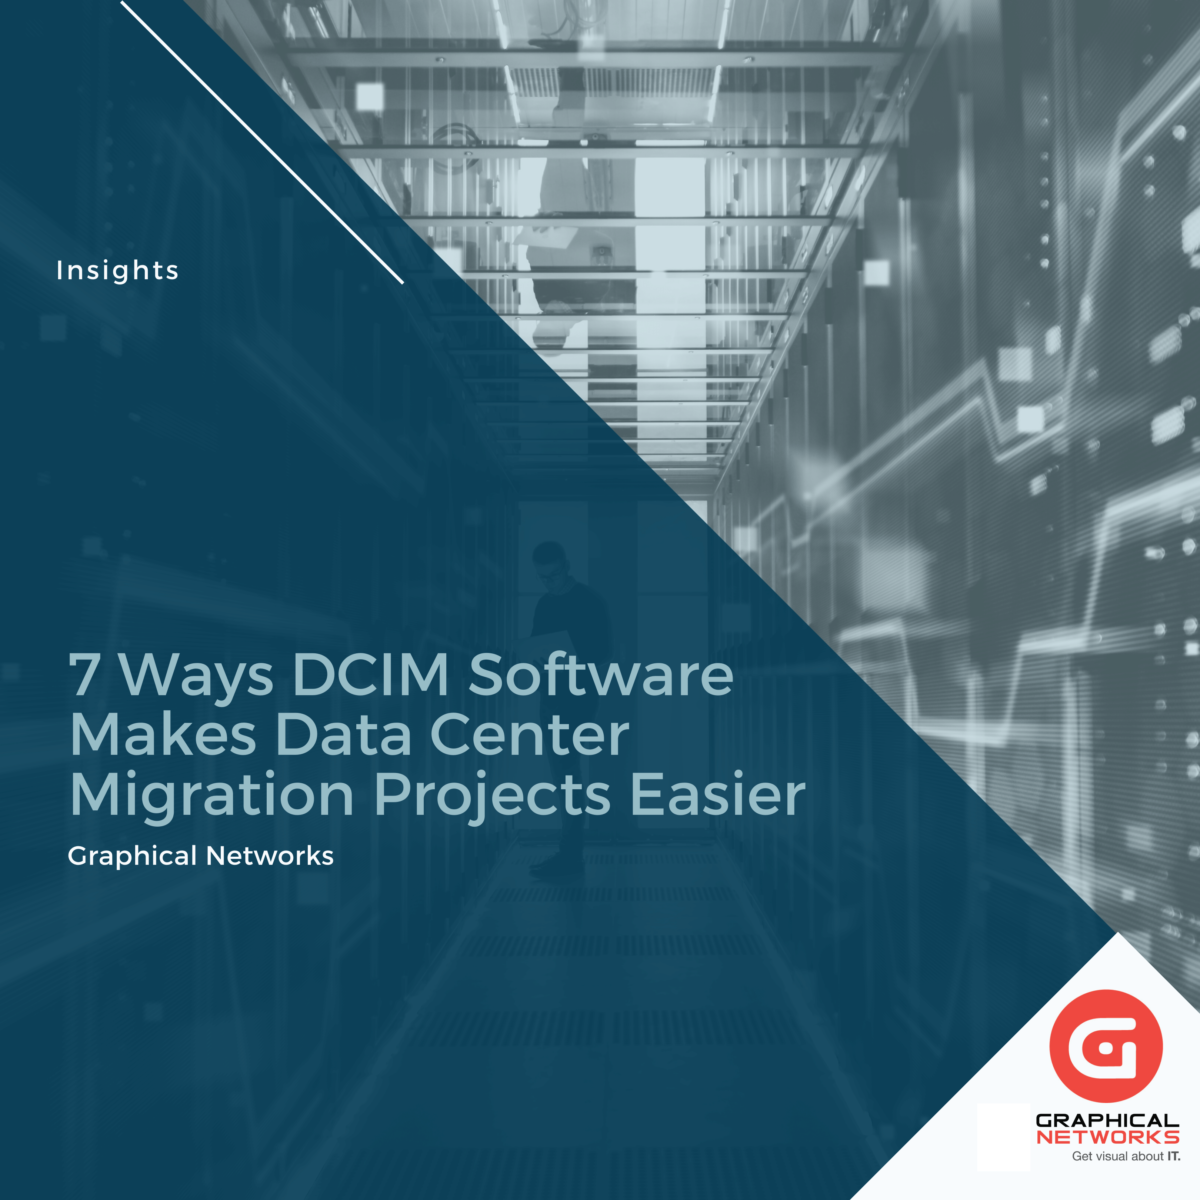 7 Ways DCIM Software Makes Data Center Migration Projects Easier